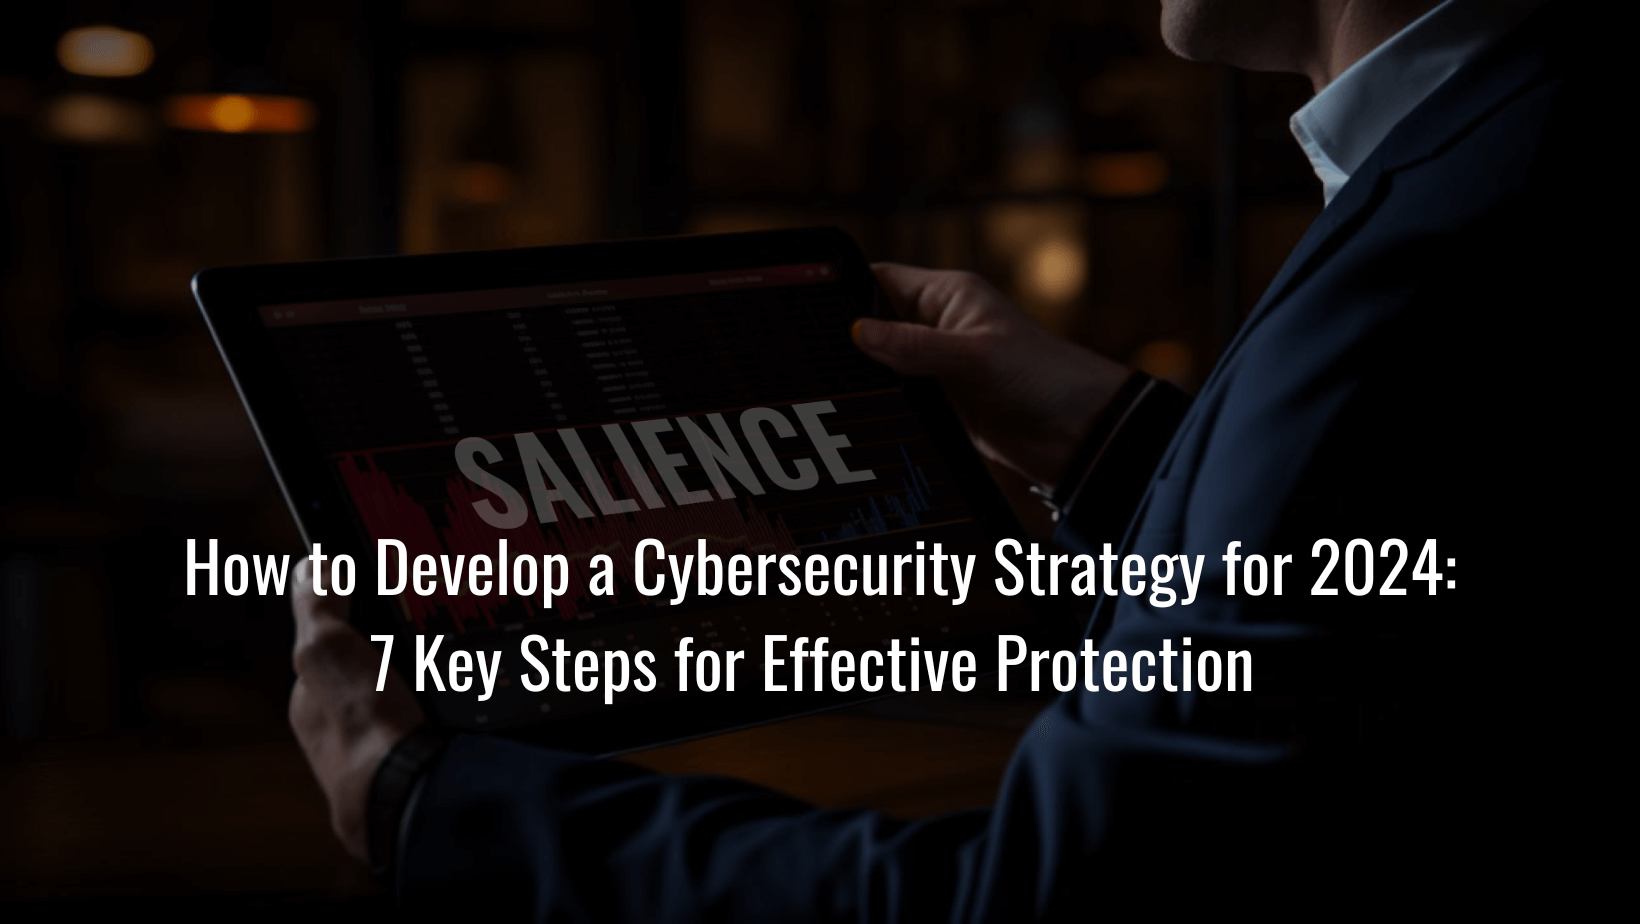 How to Develop a Cybersecurity Strategy for 2024